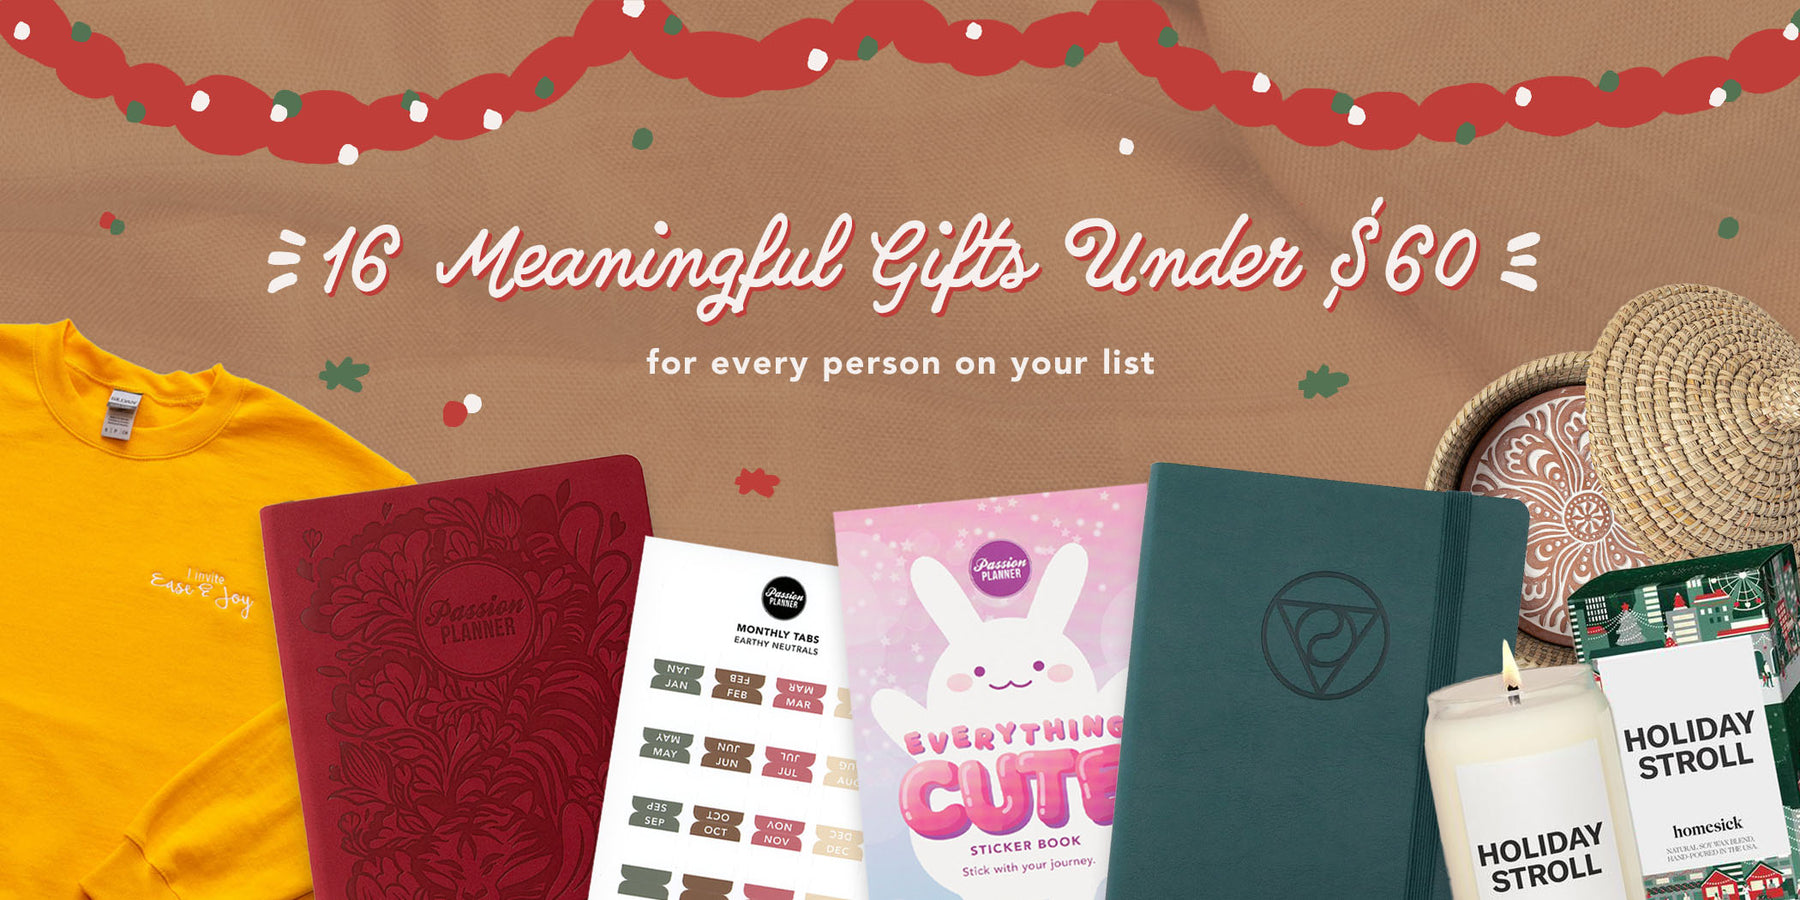 16 Meaningful Gifts Under $60 for Every Person on Your List